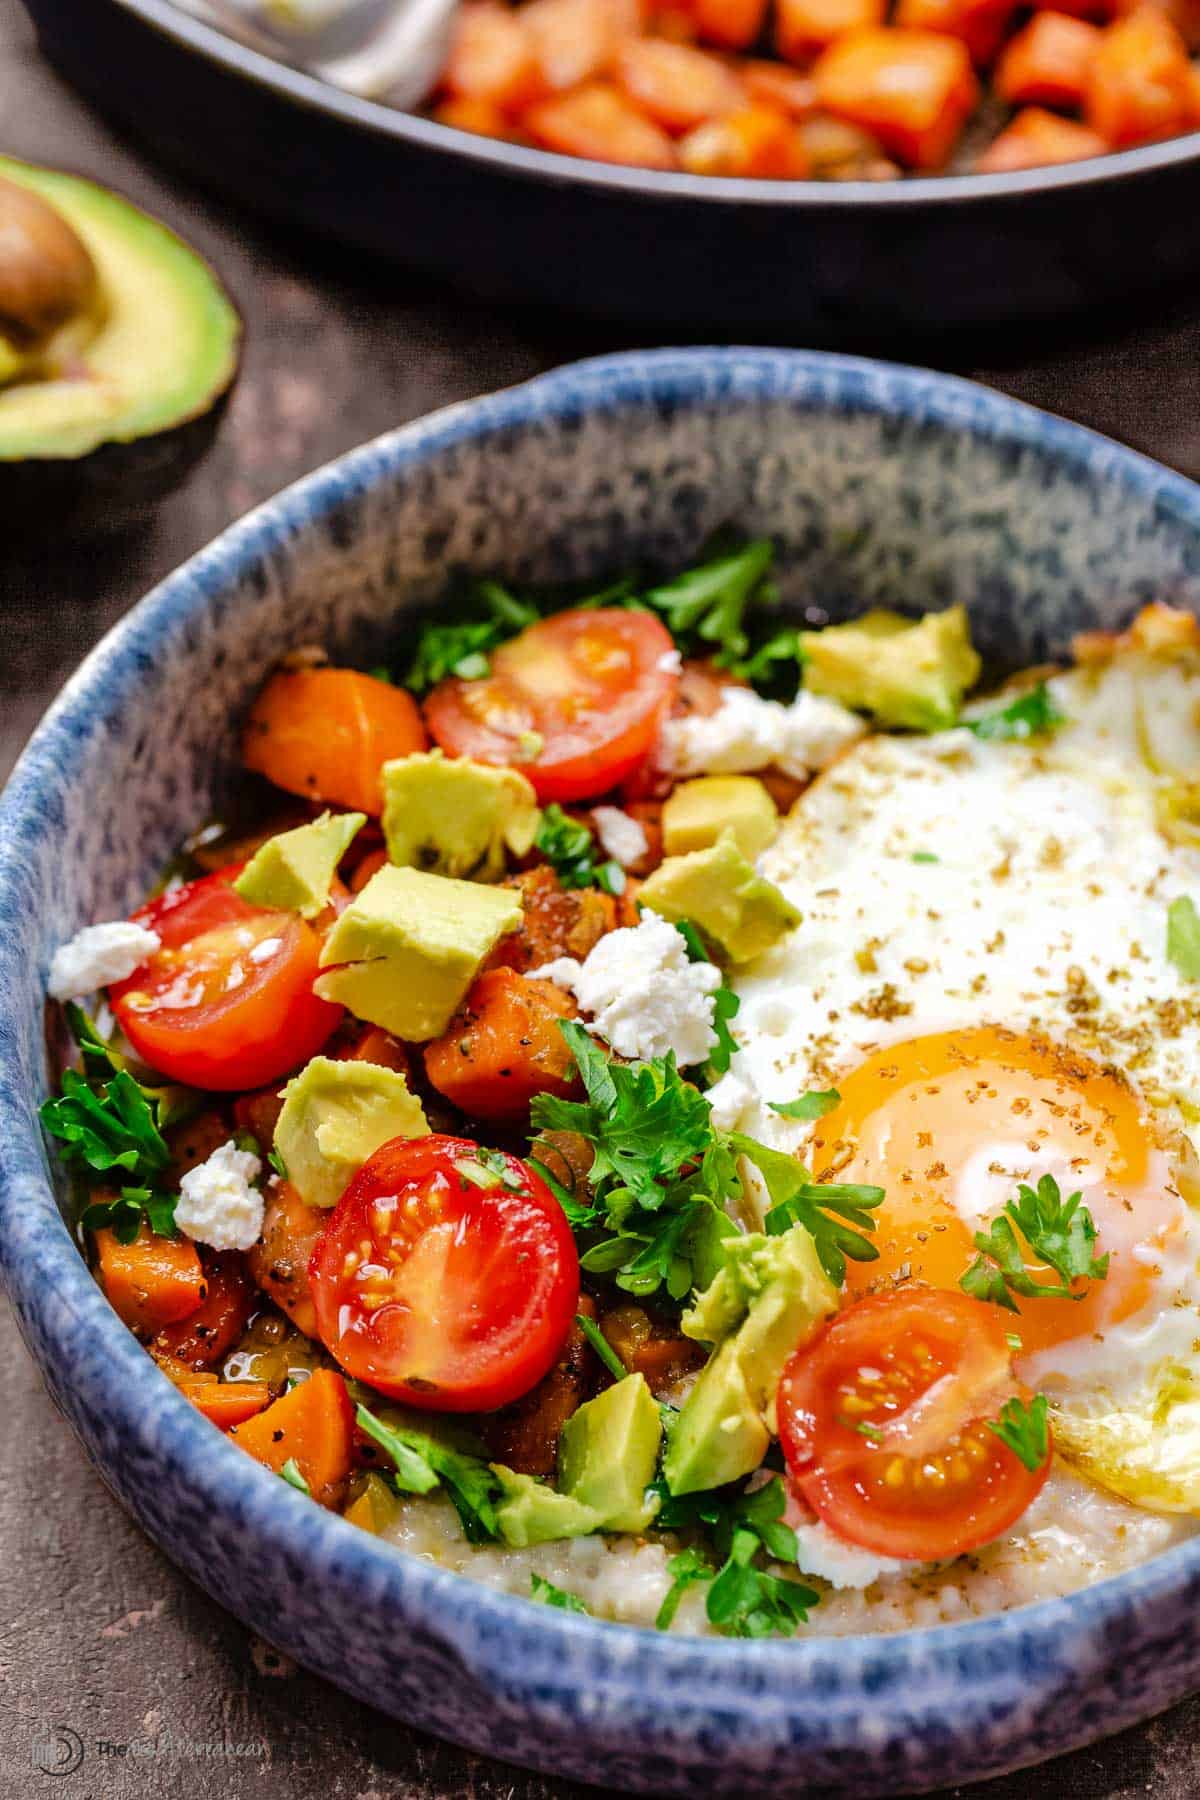 savory oatmeal bowl with egg, sweet potatoes, avocados and more